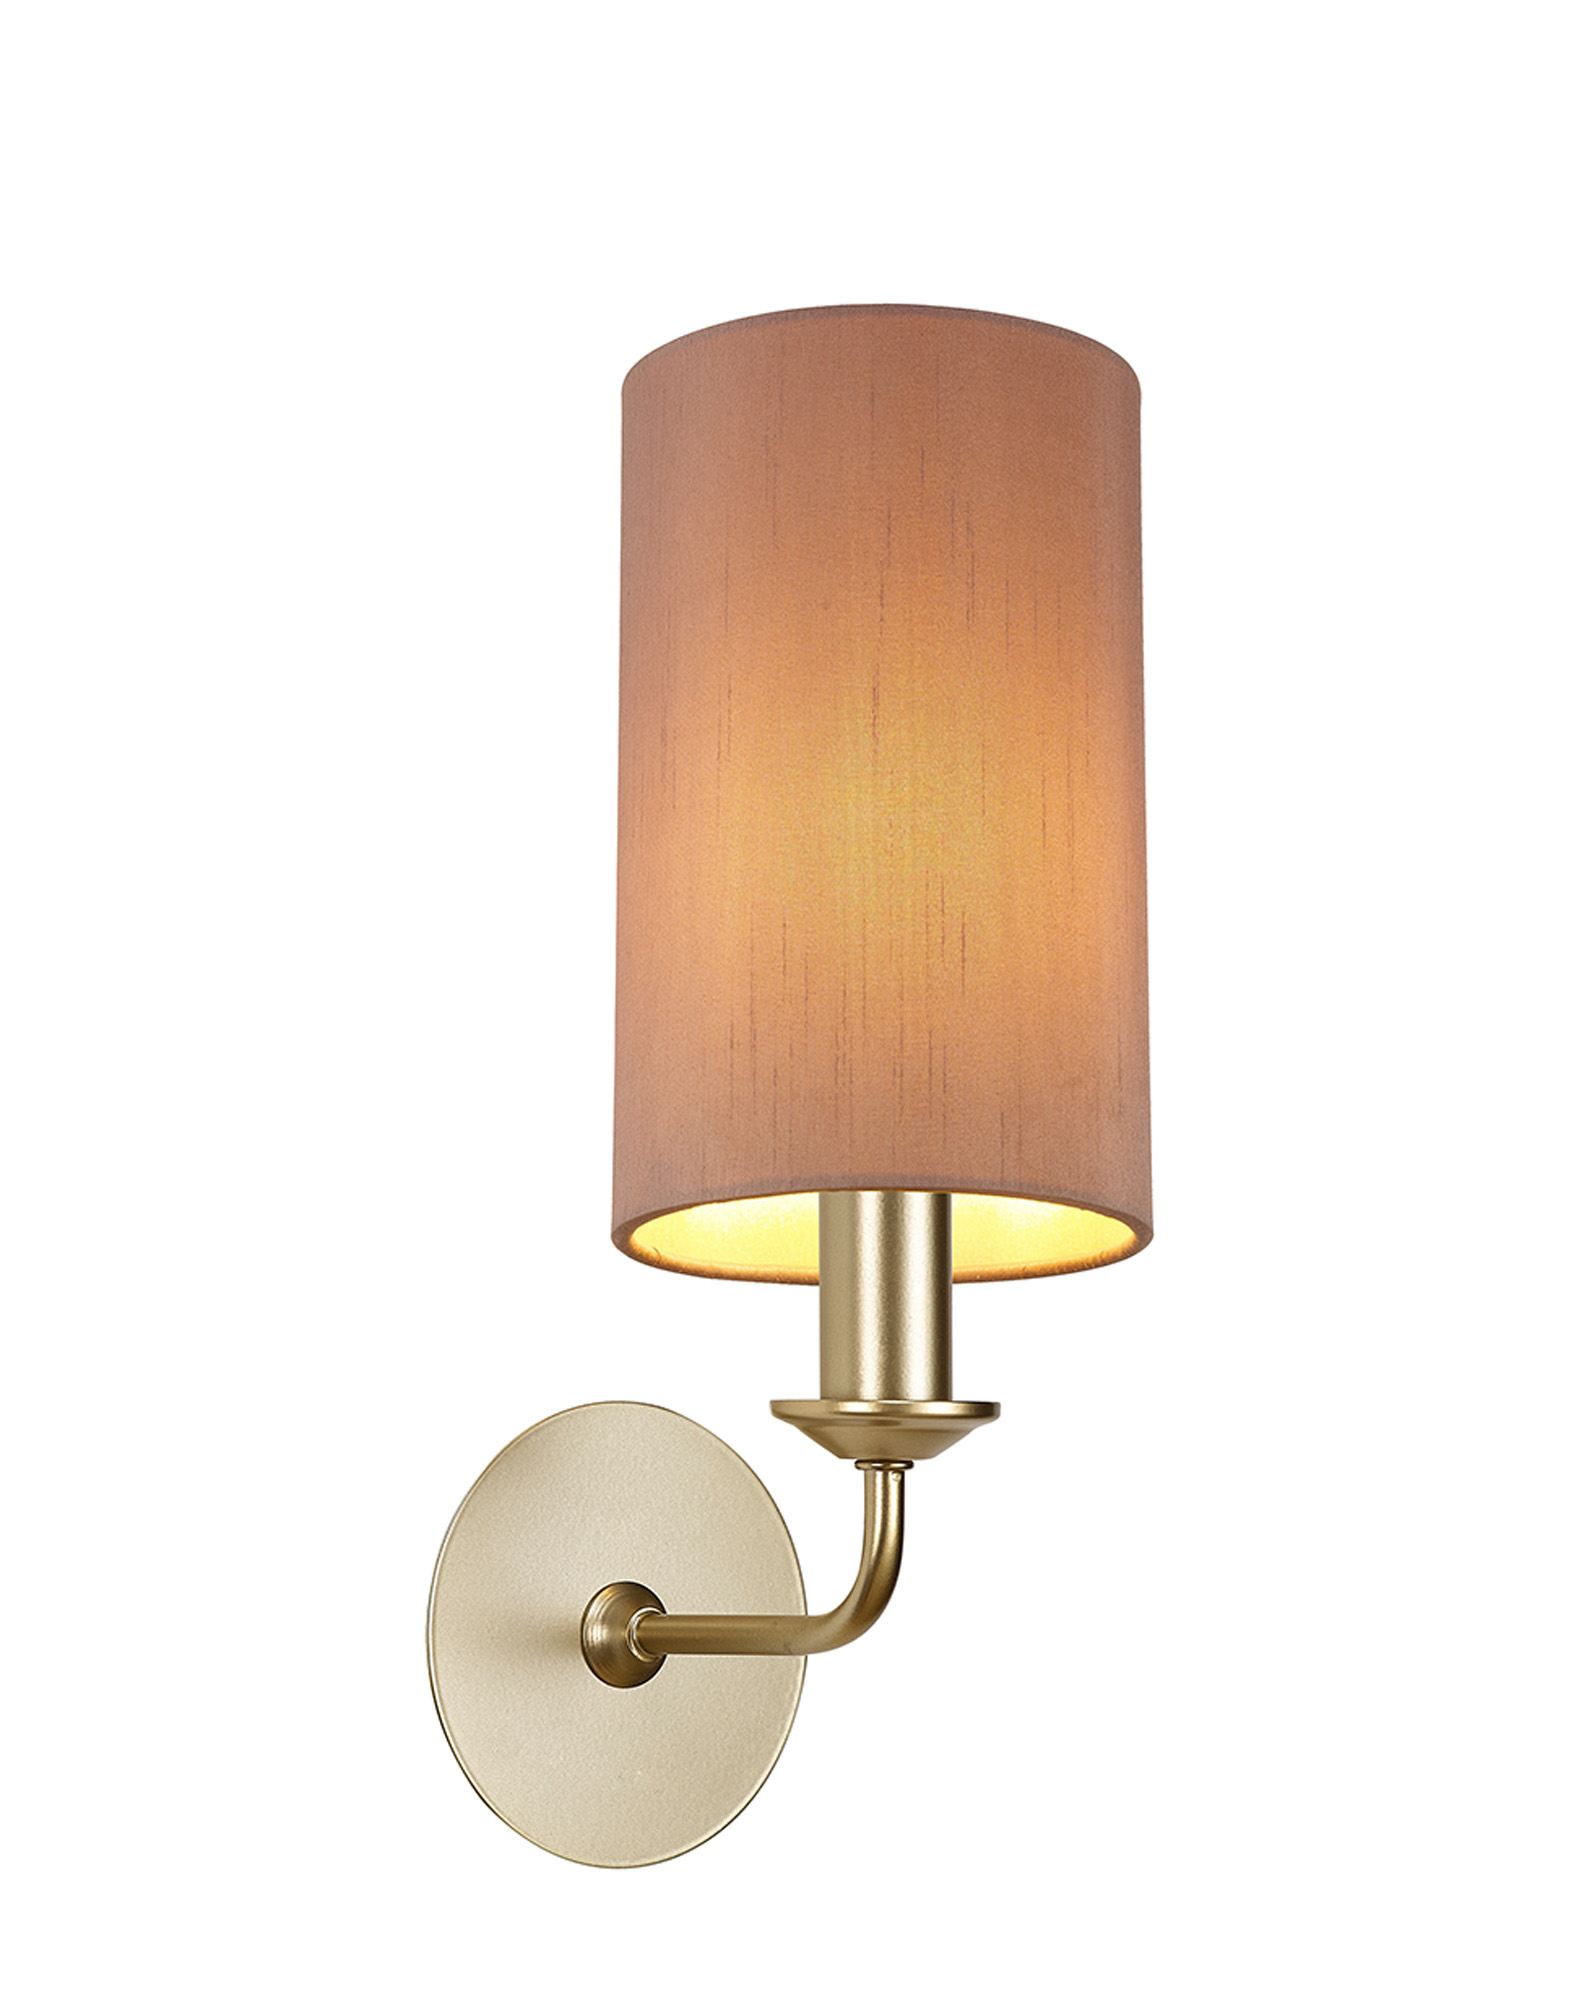 DK0958  Banyan Wall Lamp 1 Light Champagne Gold, Taupe/Halo Gold